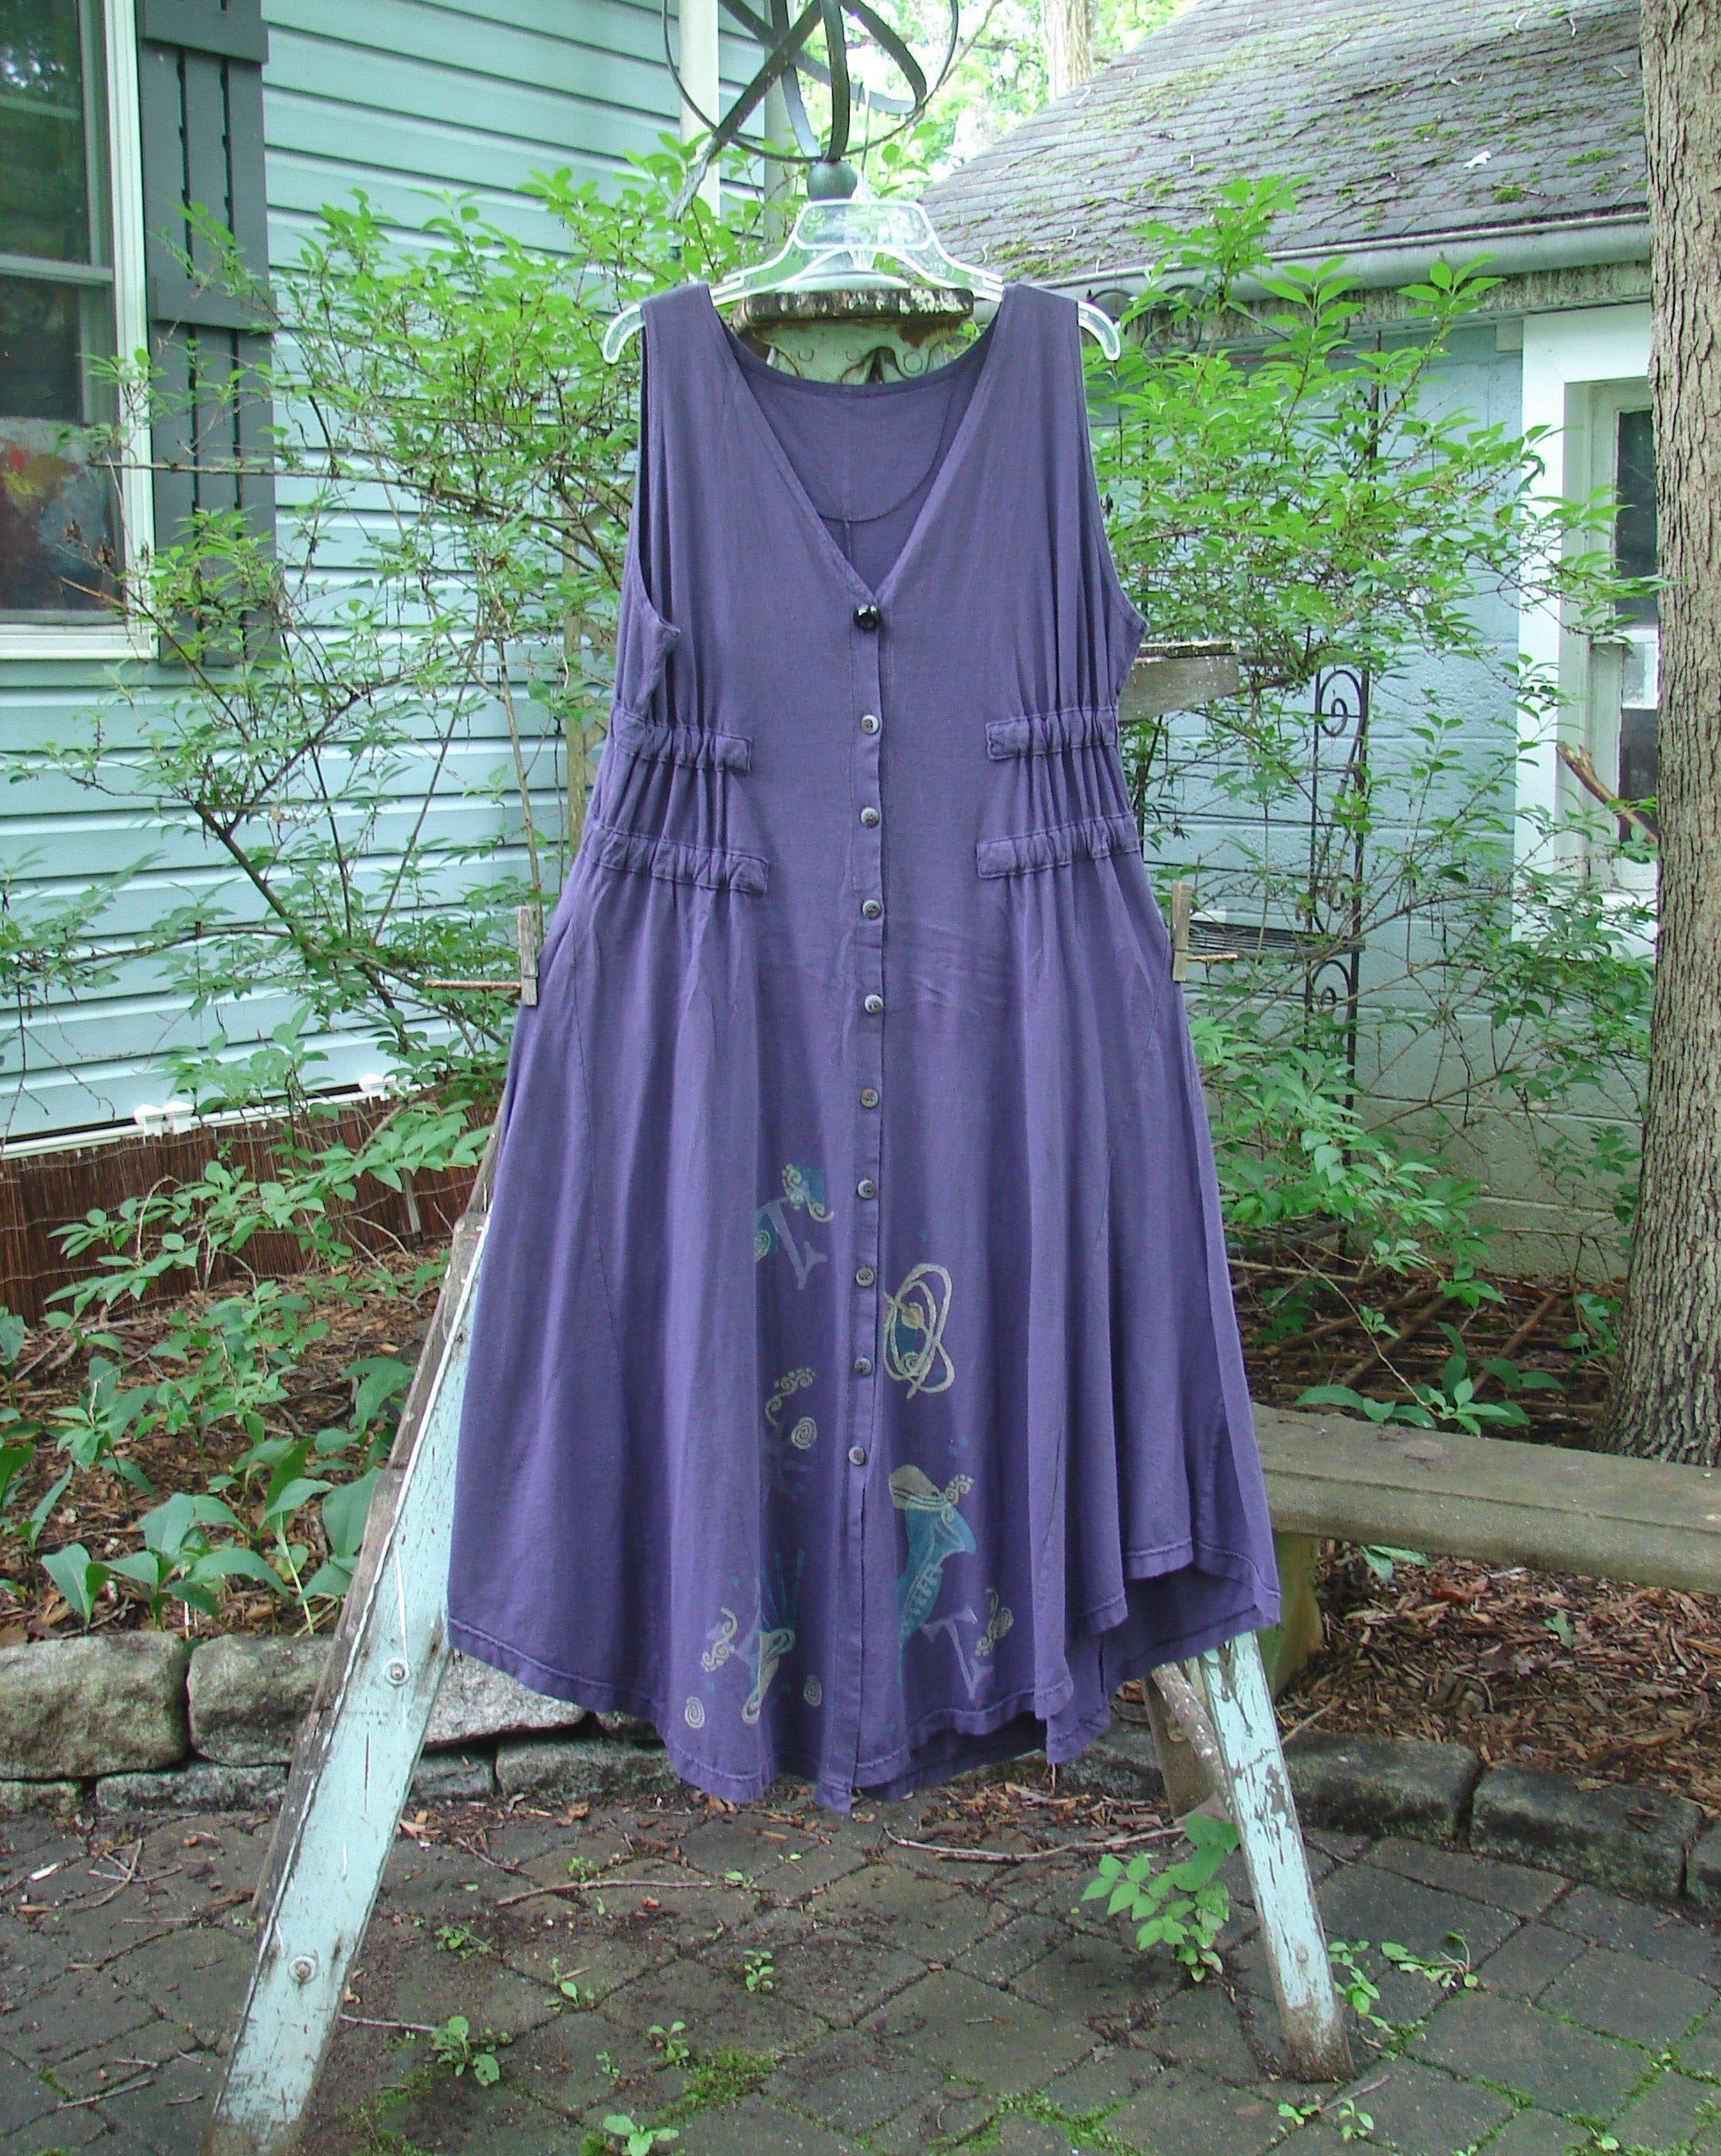 1994 Spin Jumper Mixed Purple Nuit Size 2: A purple dress on a clothes rack with a design on it.